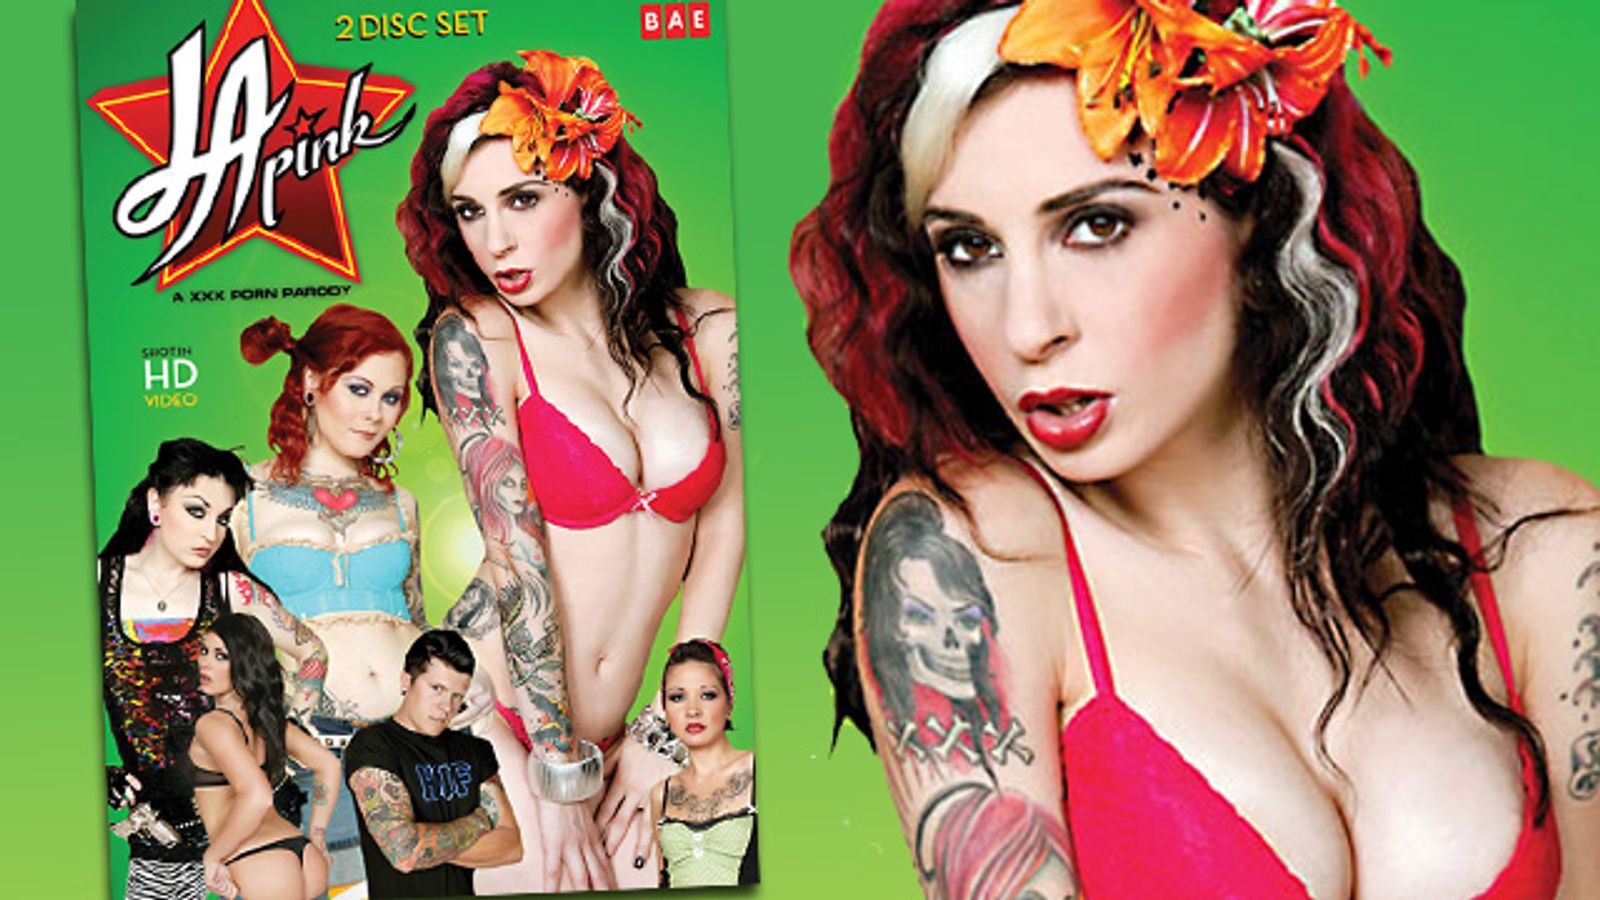 Joanna Angel Returns to Features With 'L.A. Pink'